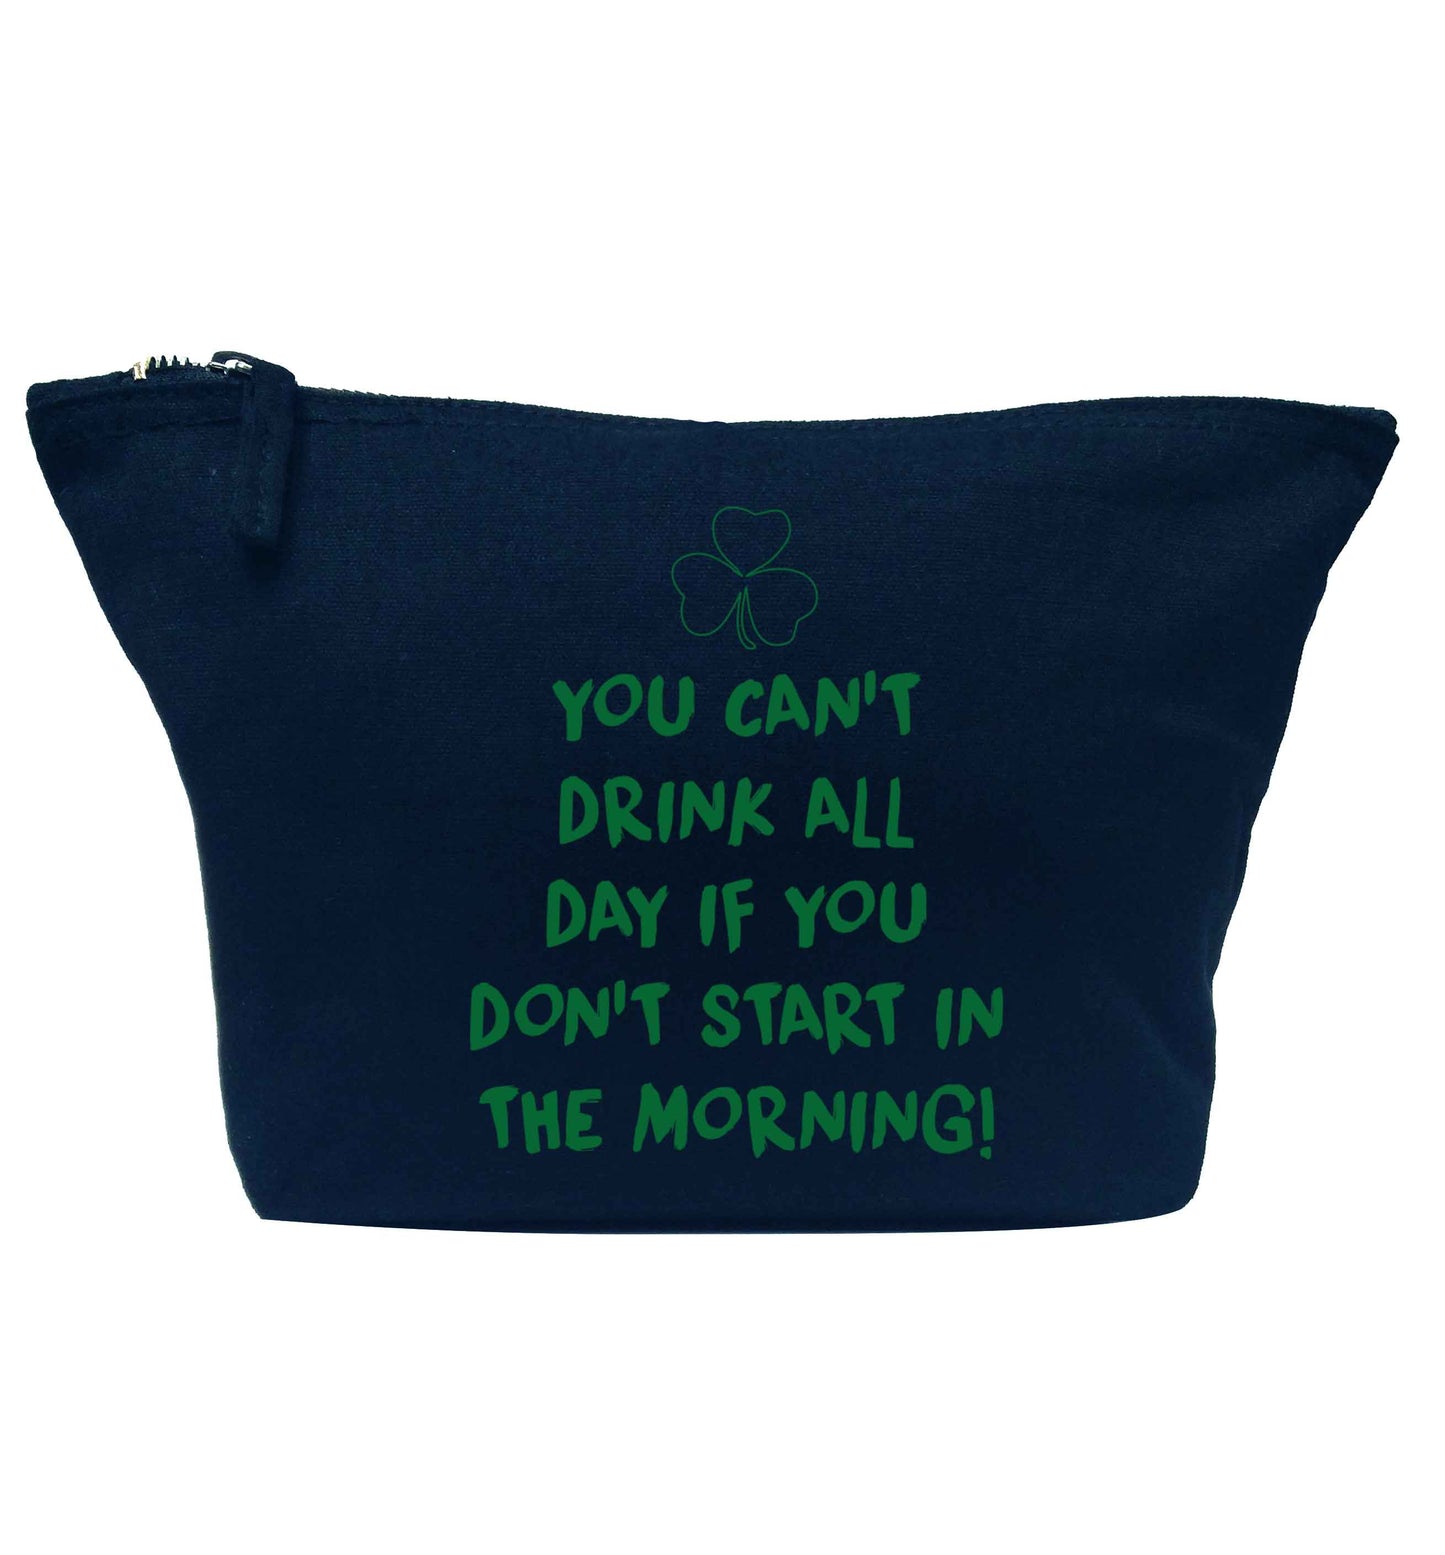 You can't drink all day if you don't start in the morning navy makeup bag